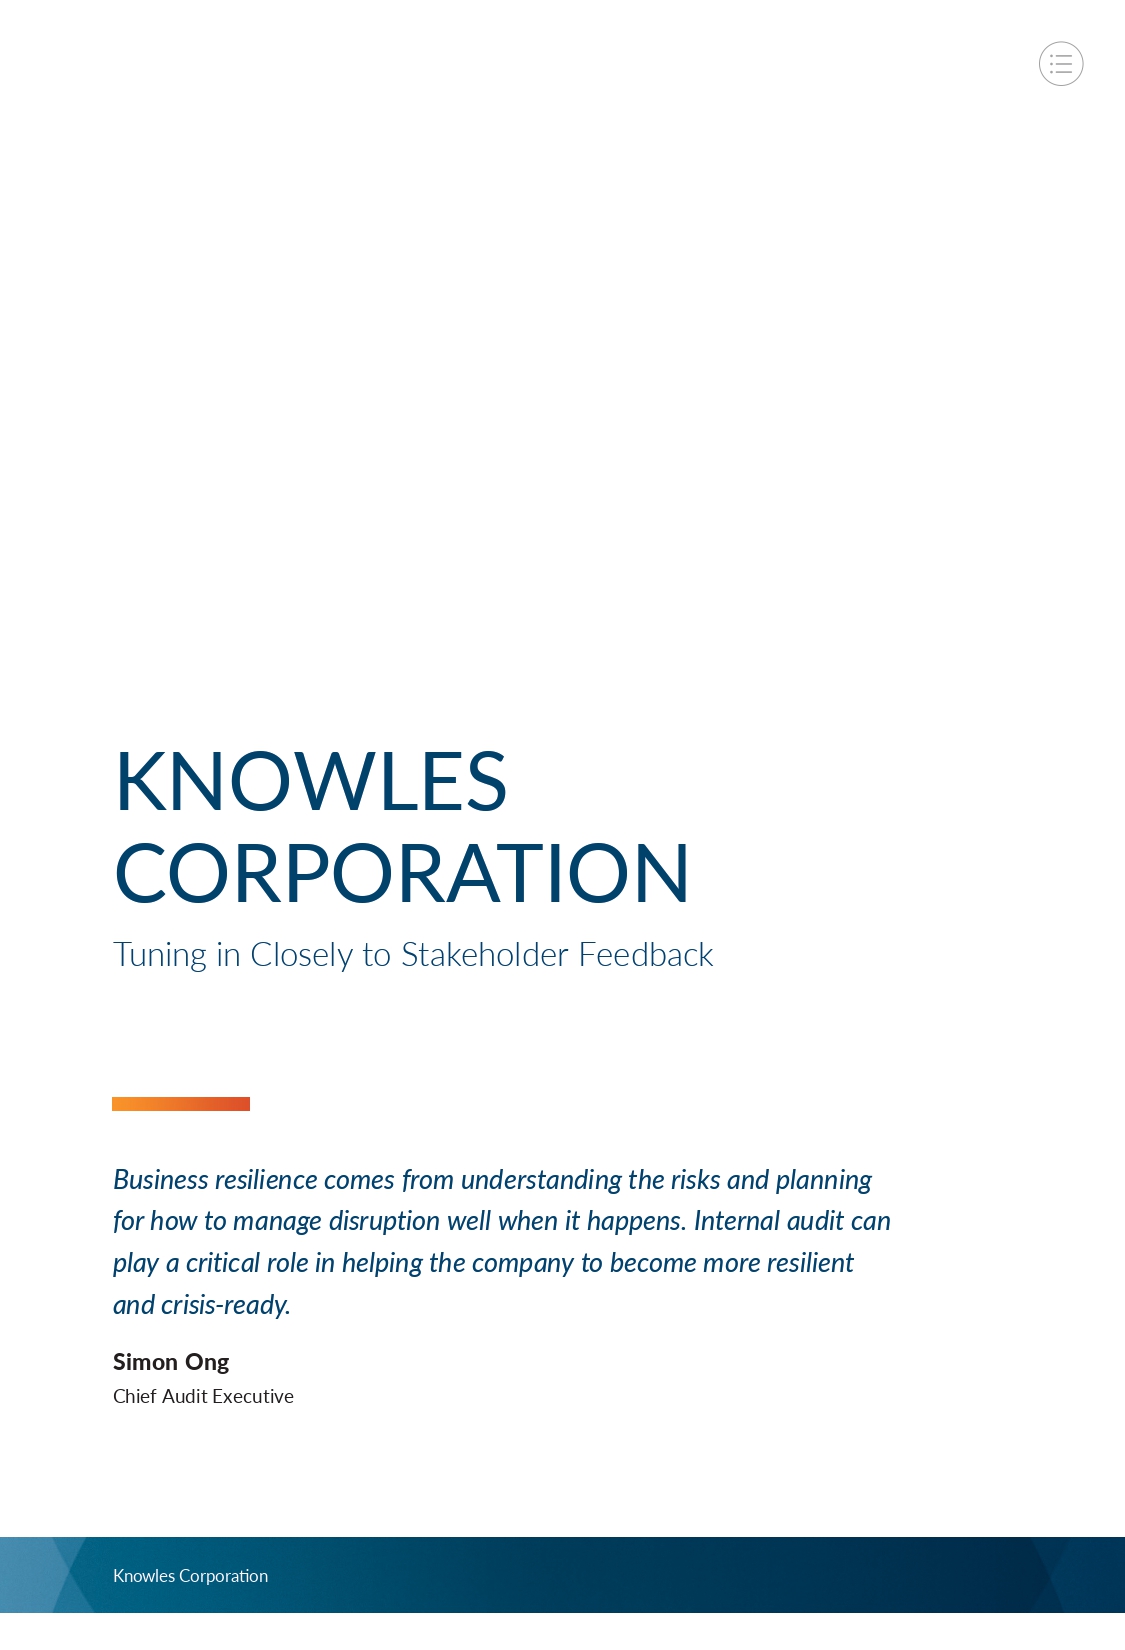 Screenshot of the first page of Knowles Corporation: Tuning in Closely to Stakeholder Feedback